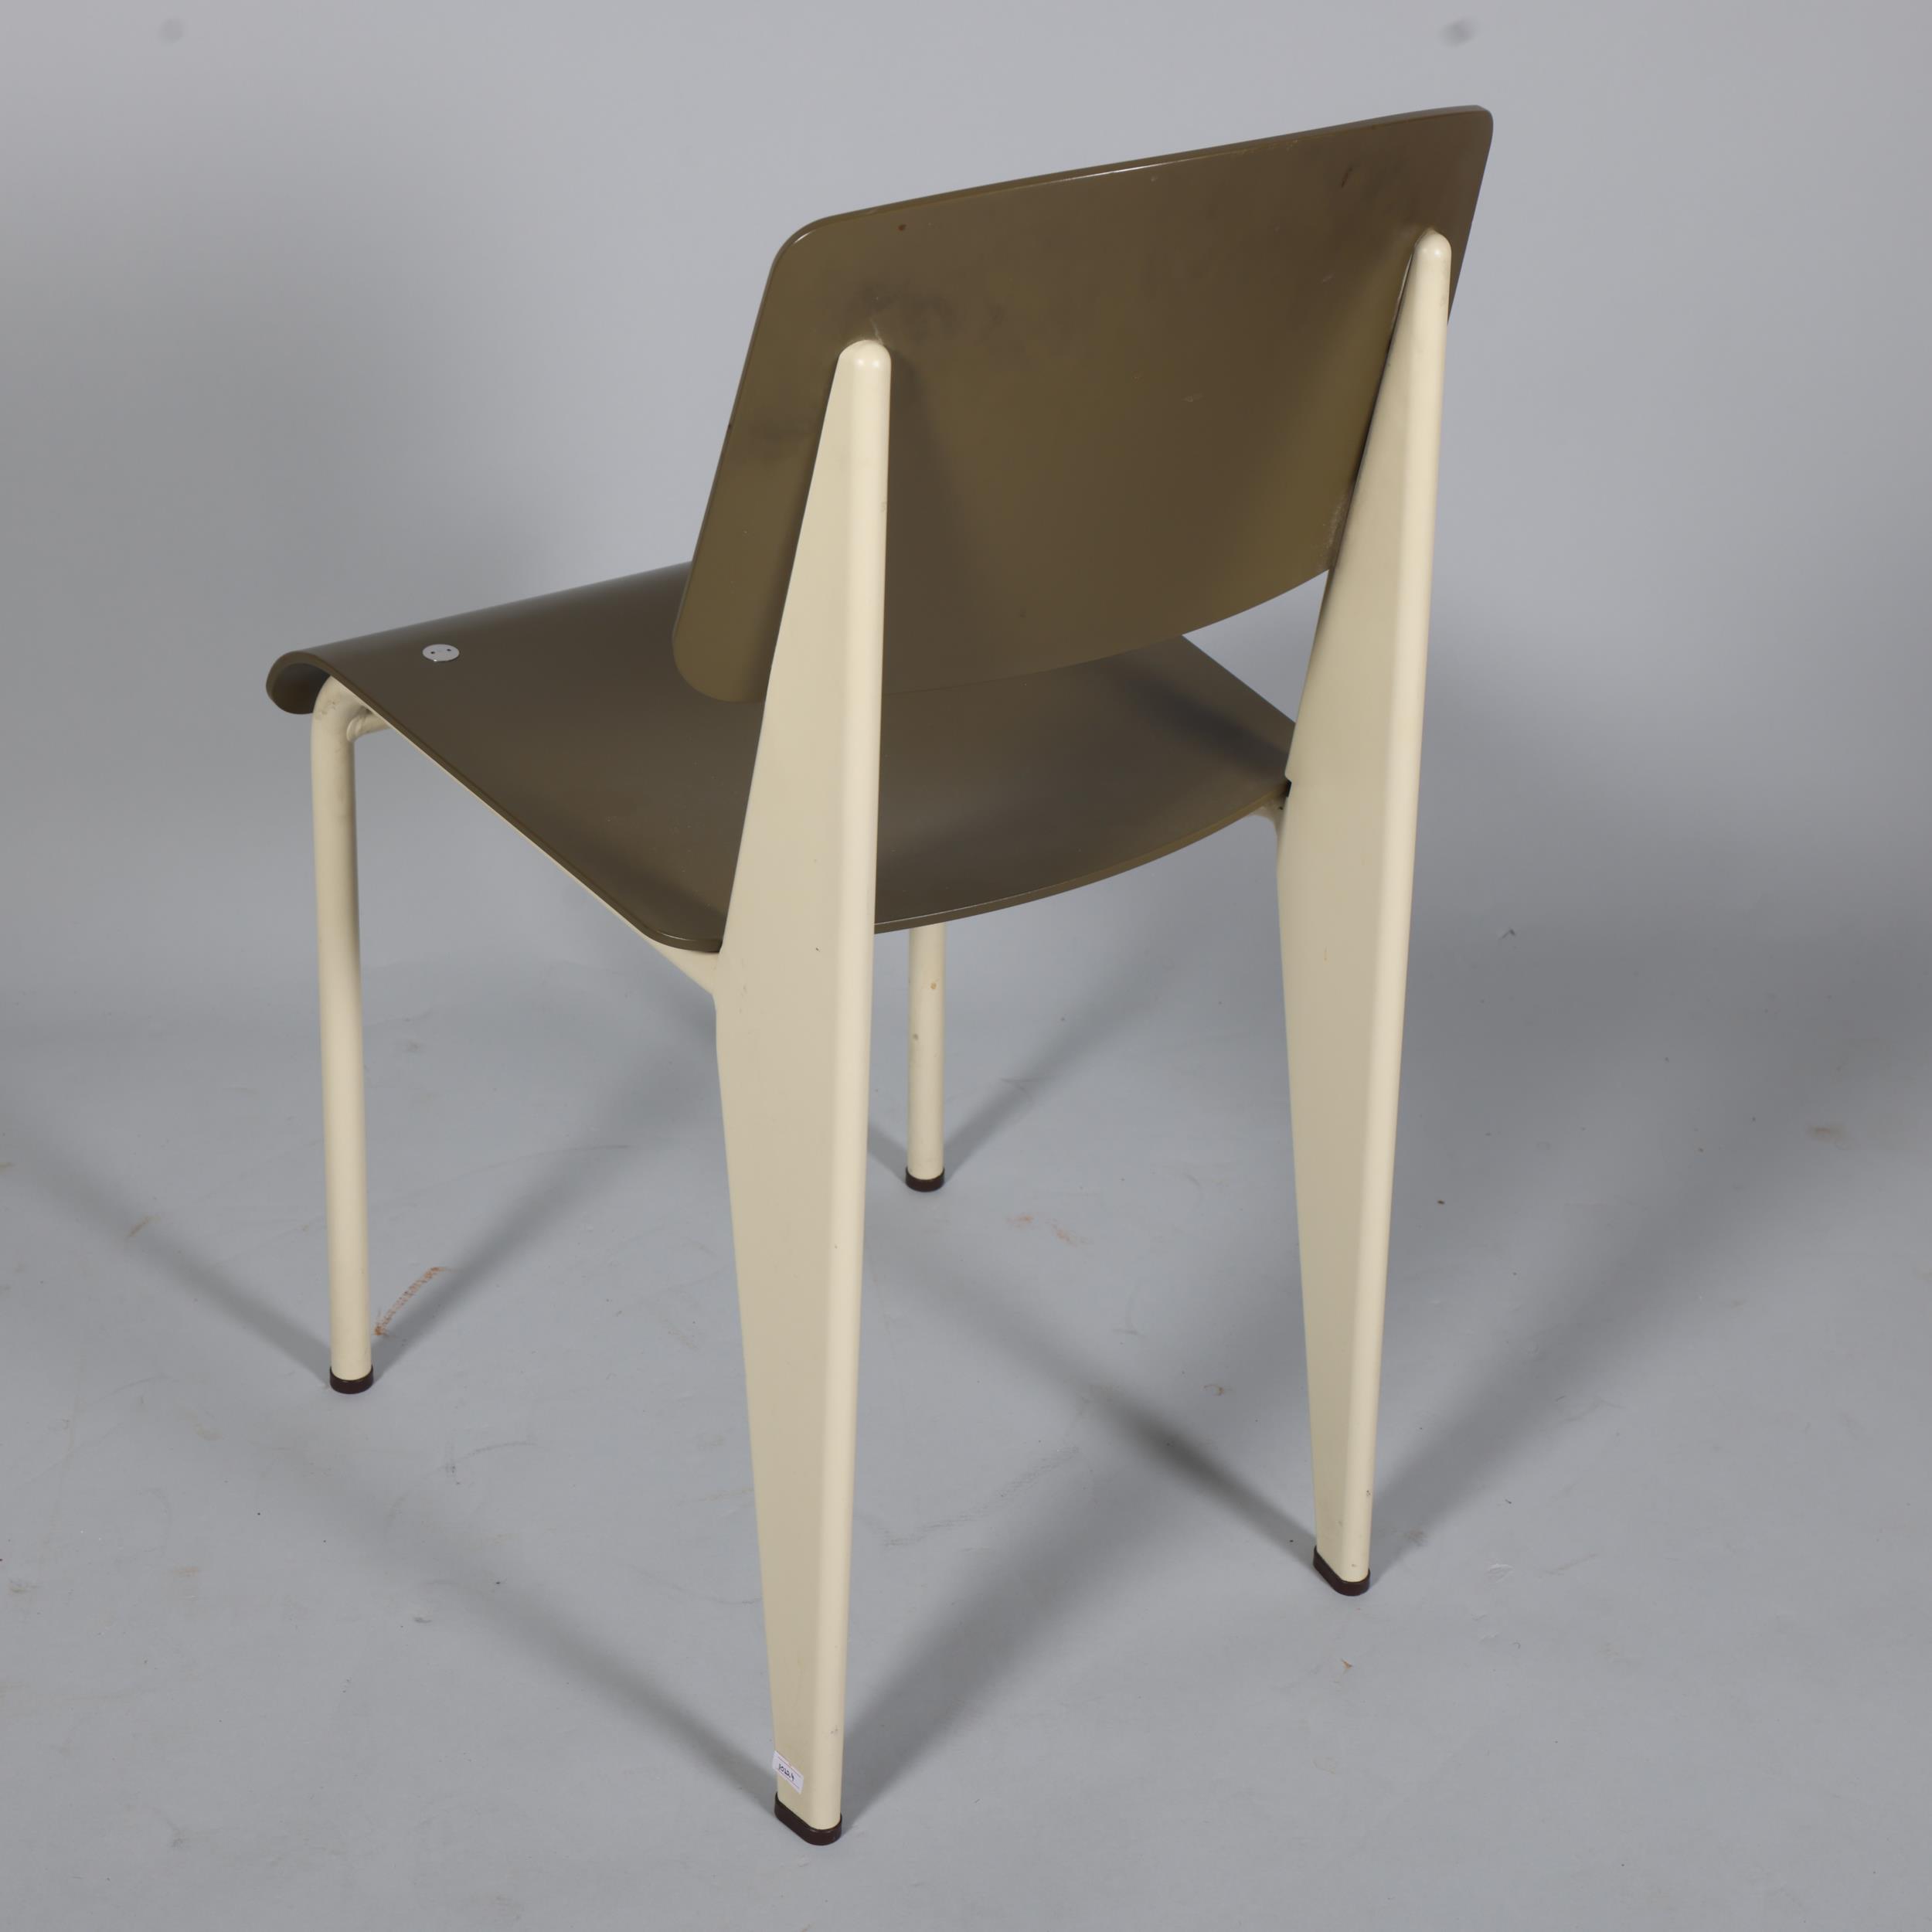 JEAN PROUVE - A Vitra Standard SP chair, olive seat on ecru base, with maker's labels and moulded - Image 2 of 3